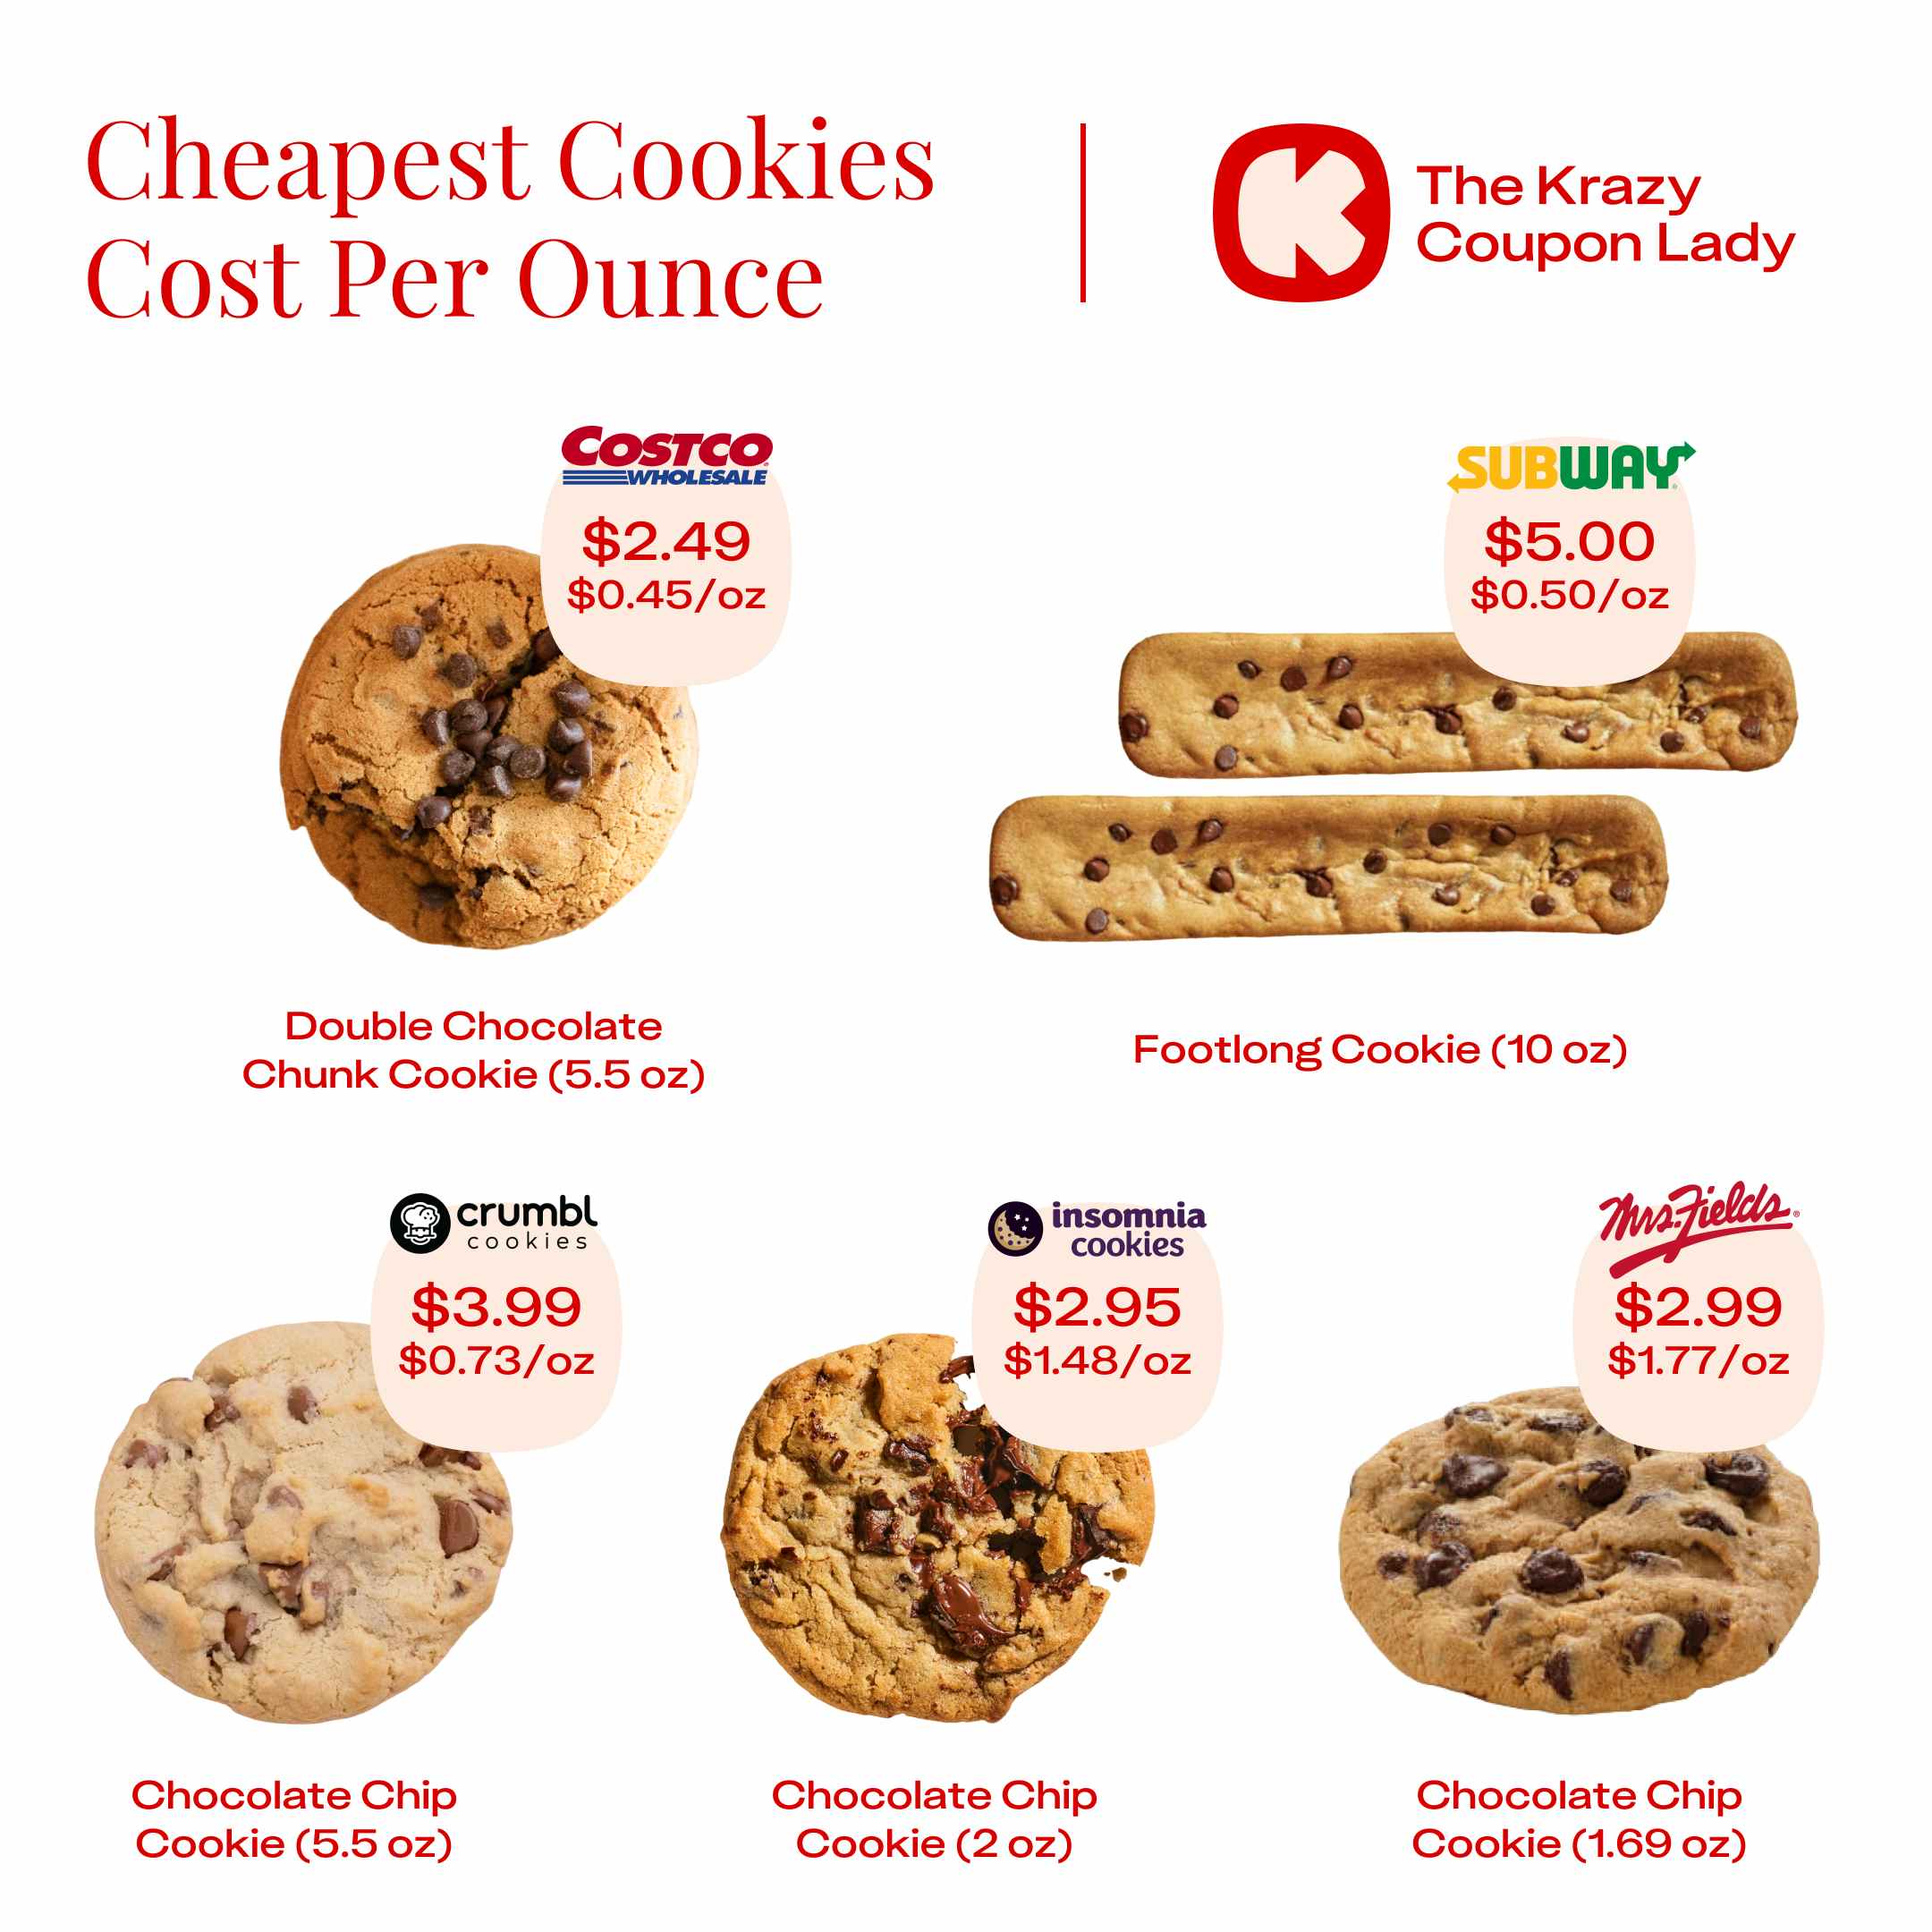 Cheapest-cookies-cost-per-ounce